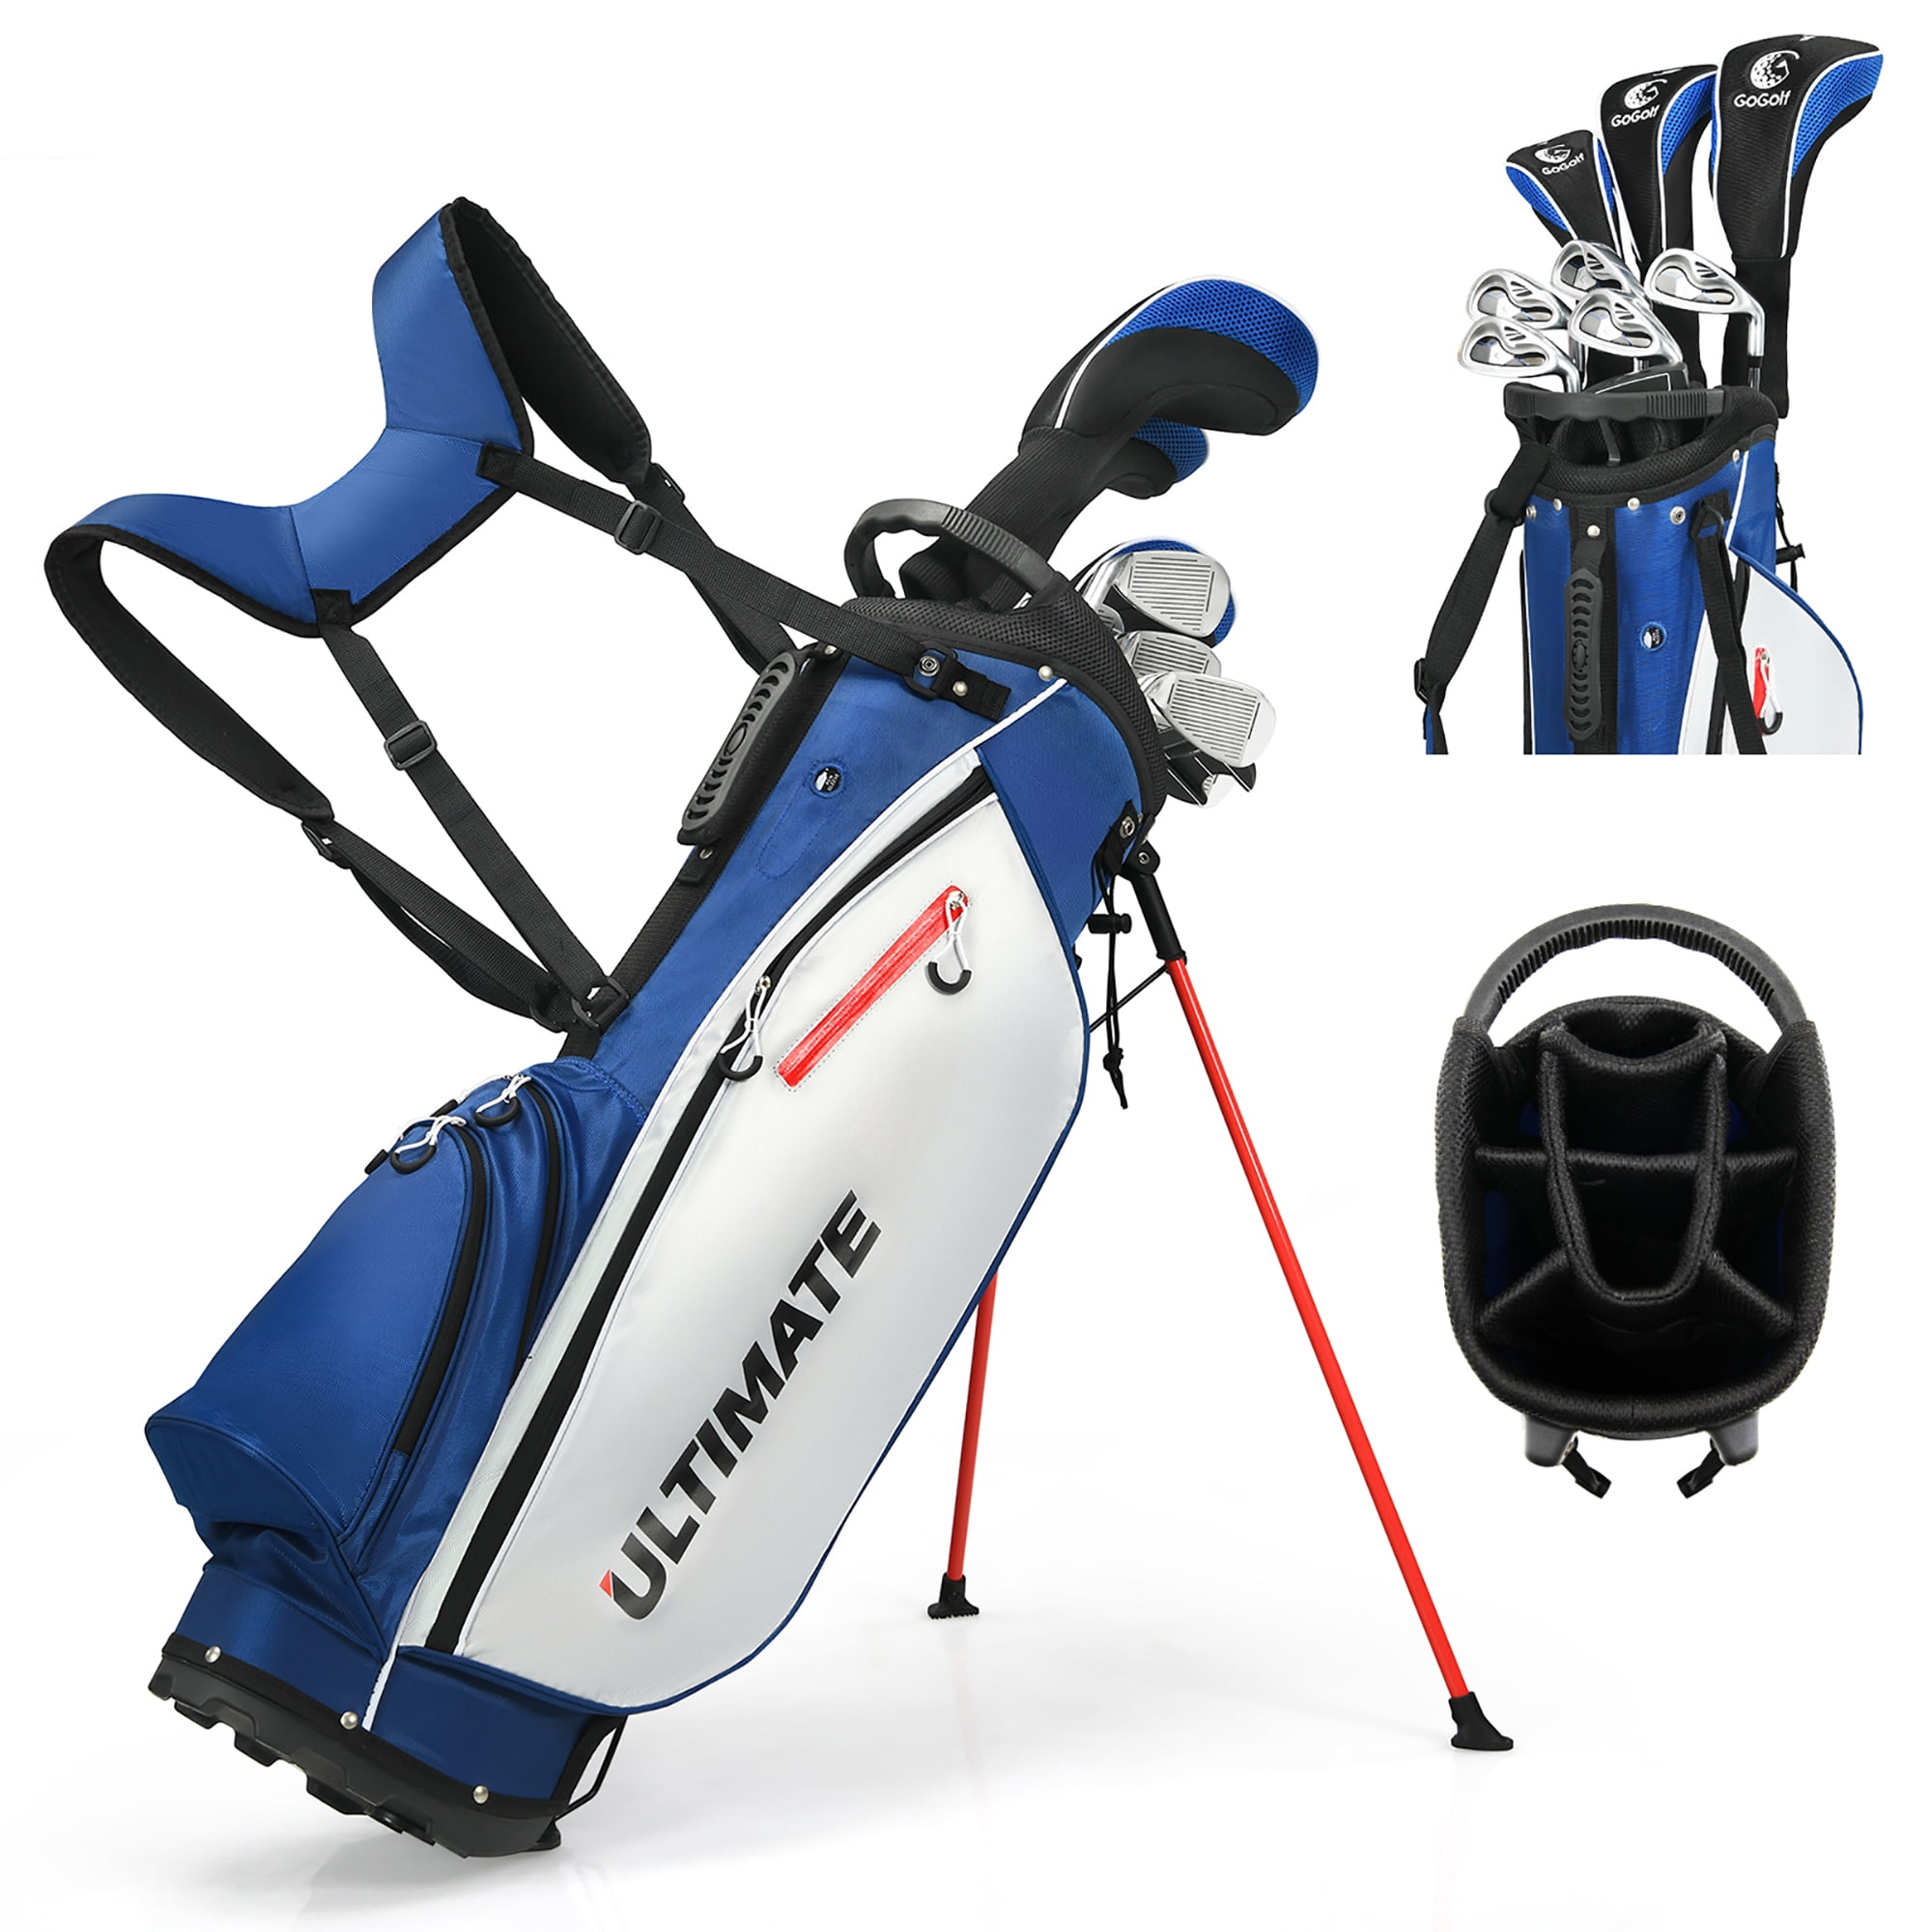 Men's Complete Golf Clubs Package Set 10 Pieces Includes Alloy Driver